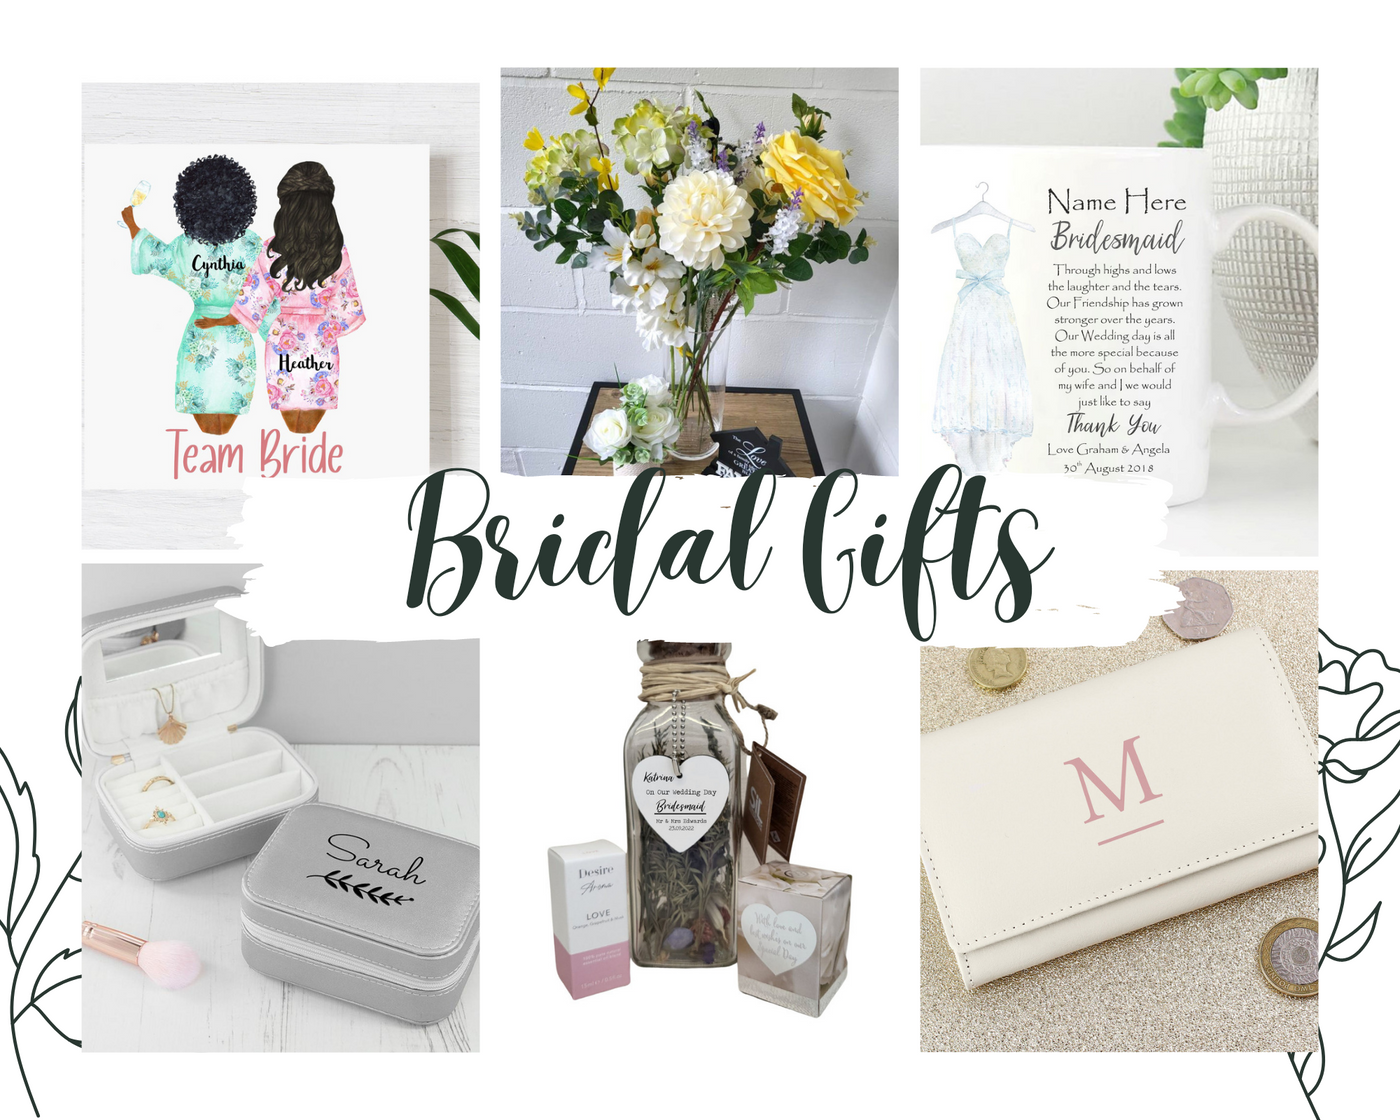 Bridesmaid Thank You Gifts & Ideas 2022